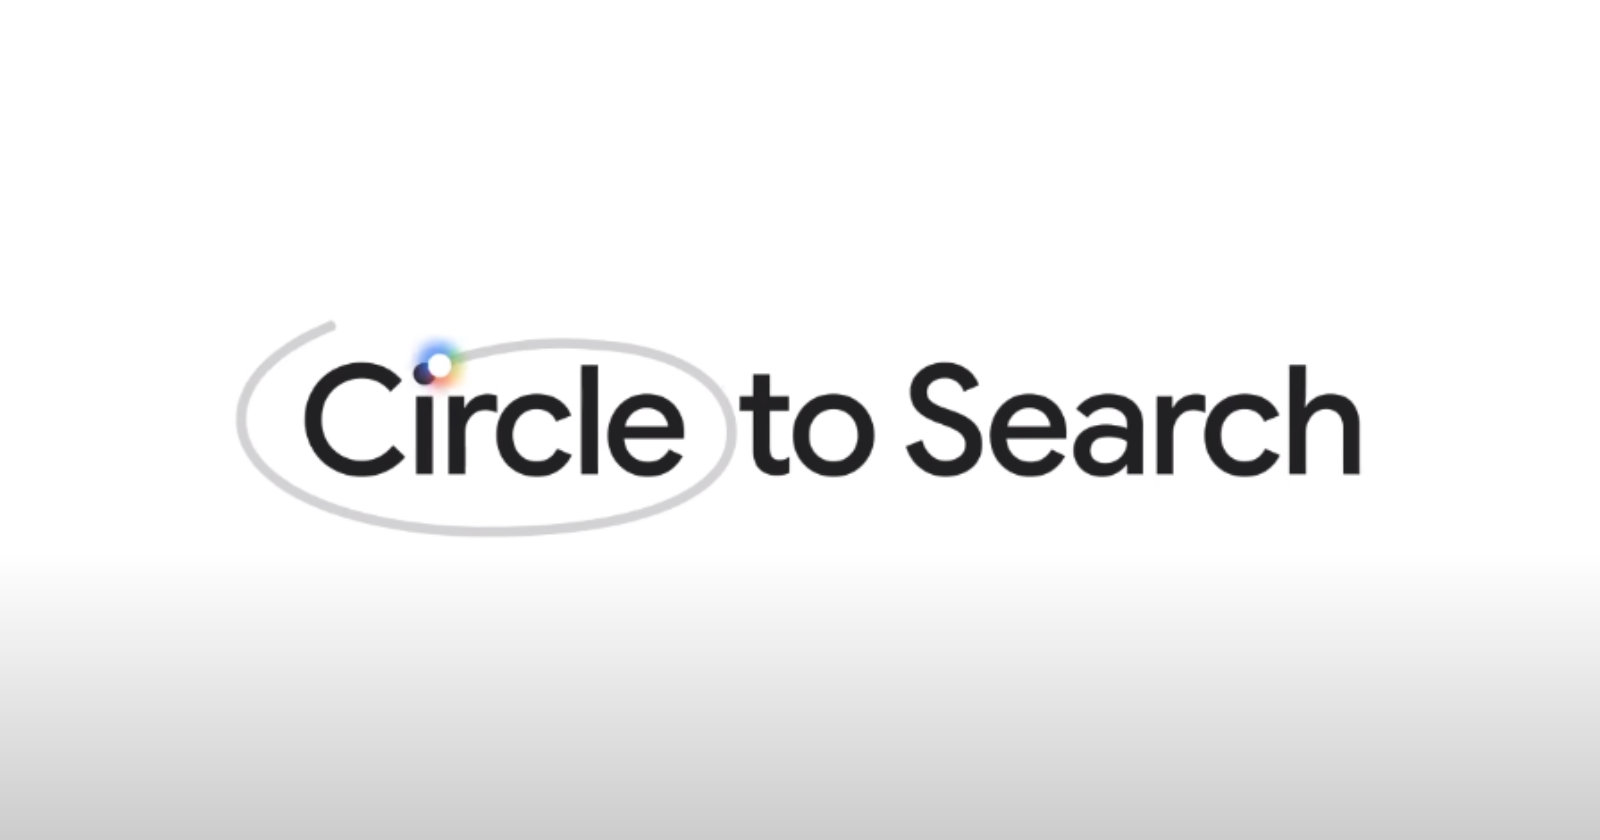 How to use Circle to Search on Google Pixel phones